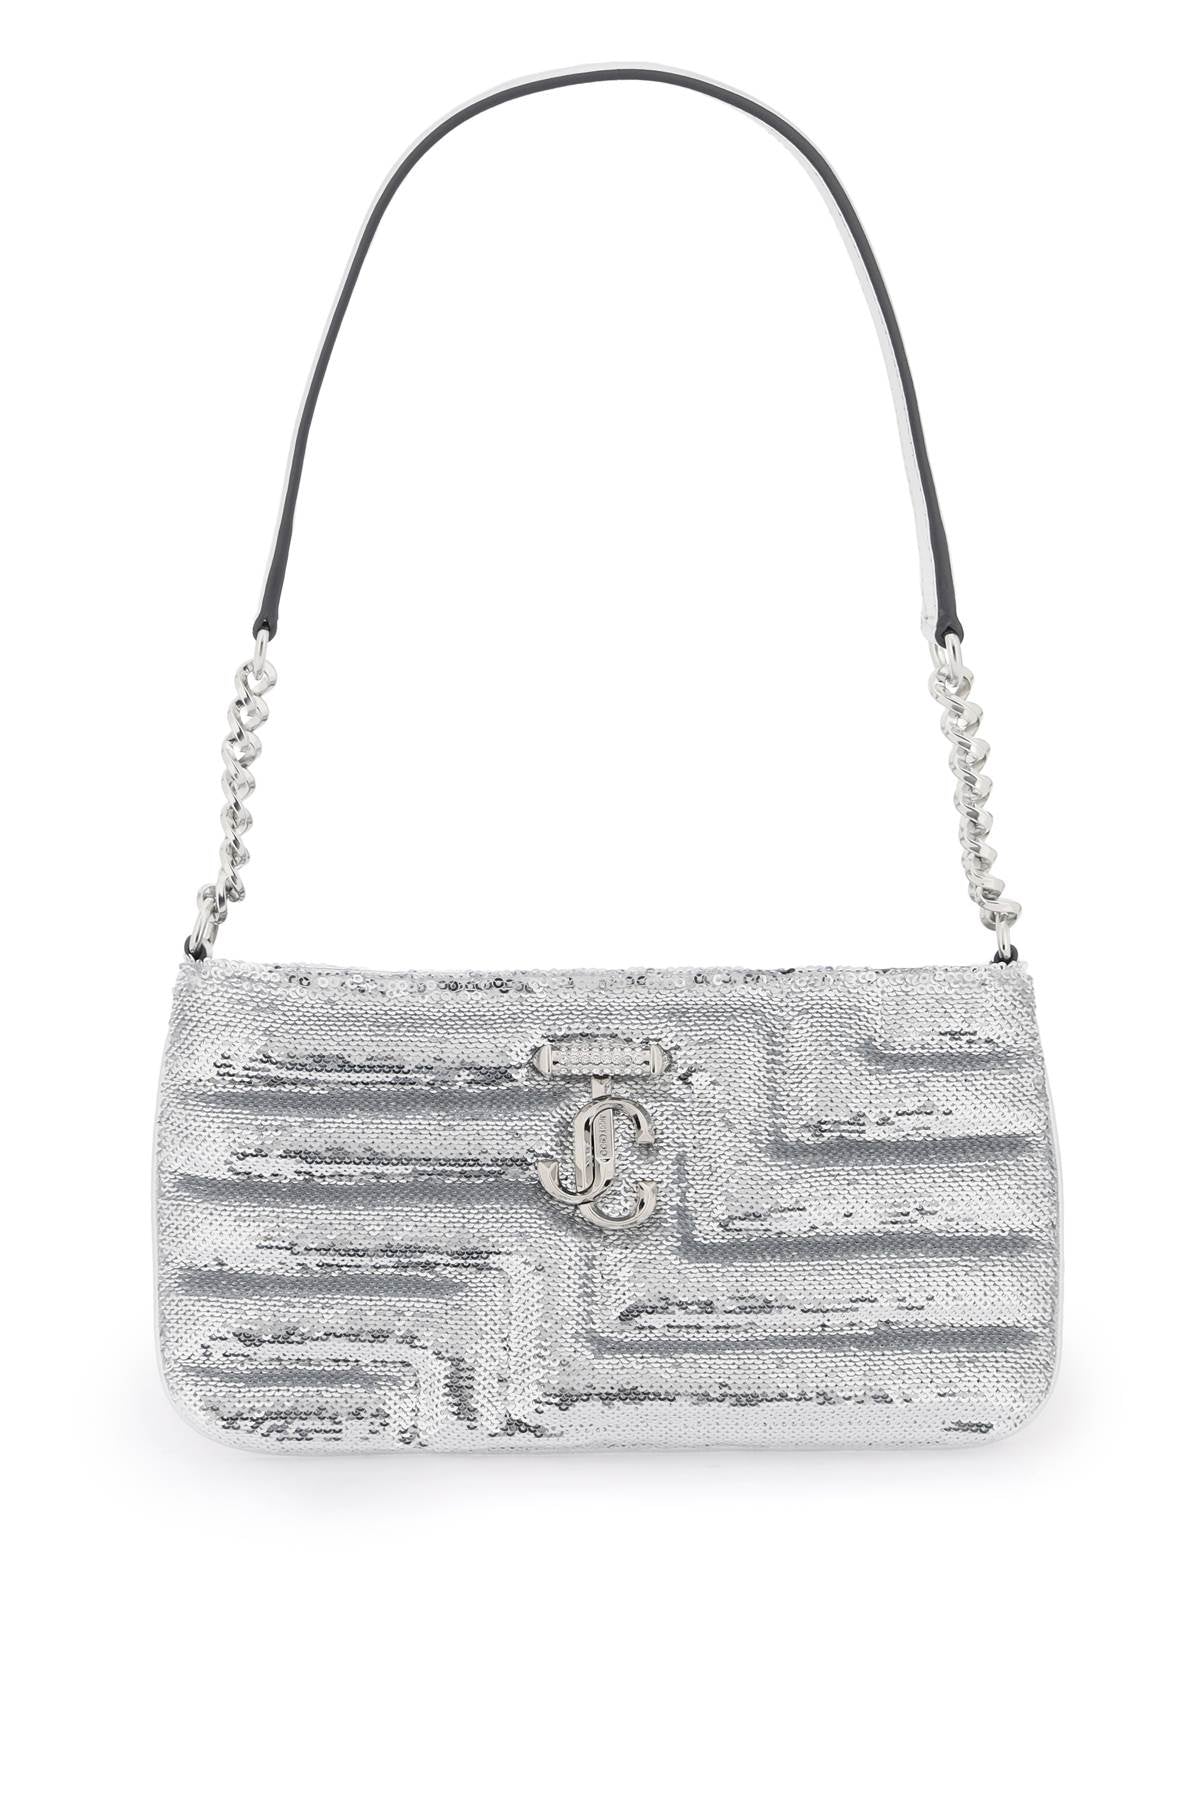 Jimmy Choo Glittering Silver Shoulder Bag For Women With All-over Sequins And Monogram Detail In Grey